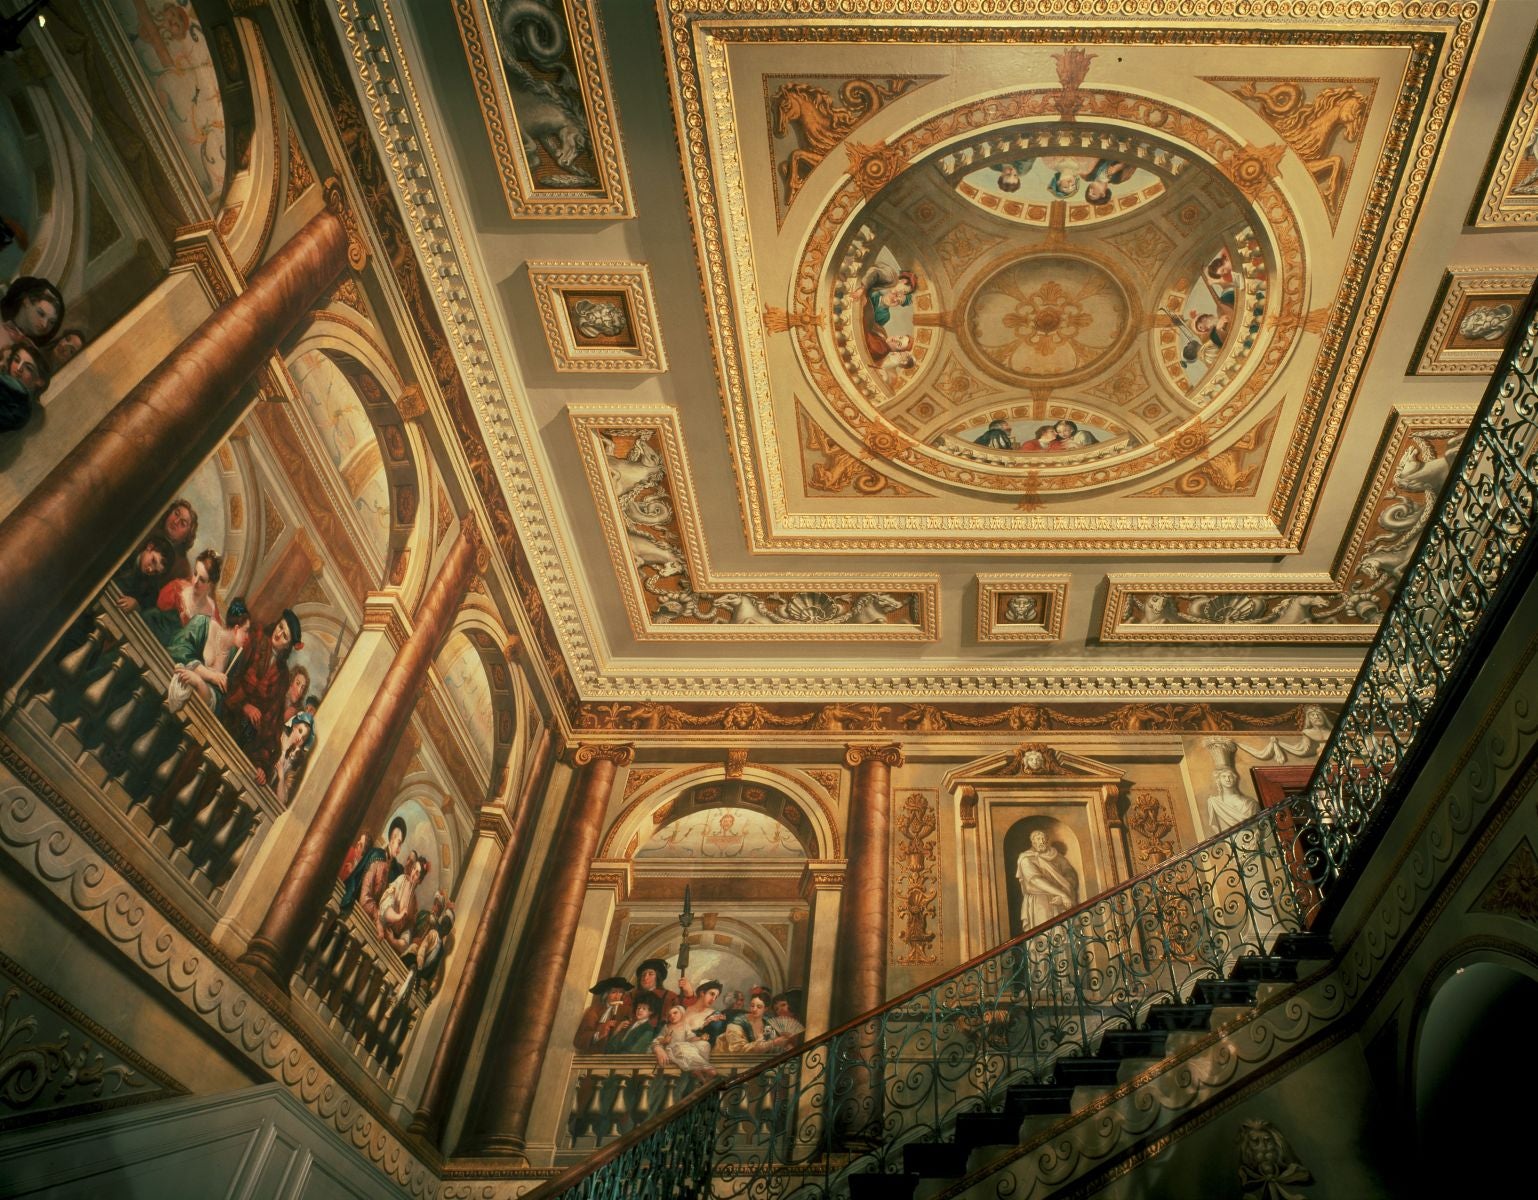 The King's Staircase at Kensington Palace, designed by William Kent.